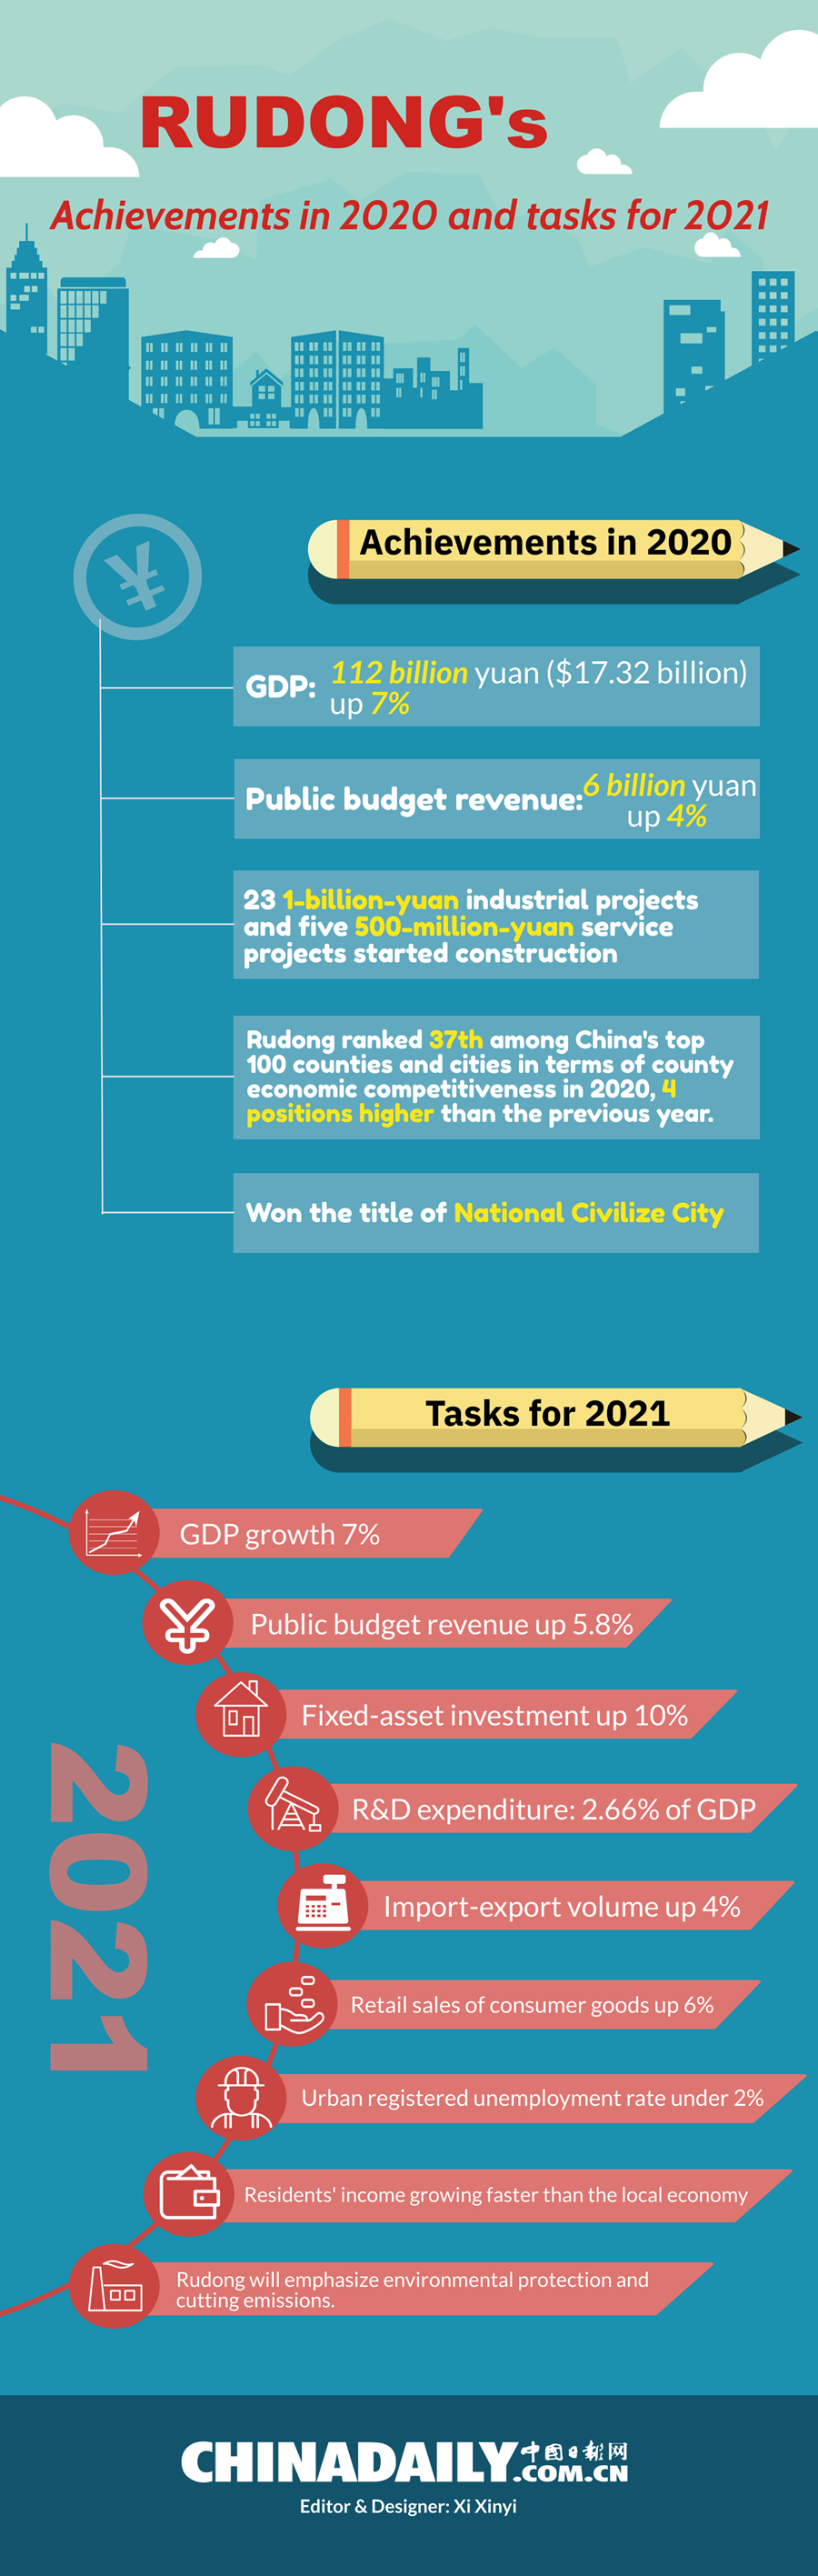 Rudong's achievements in 2020 and tasks for 2021.jpg